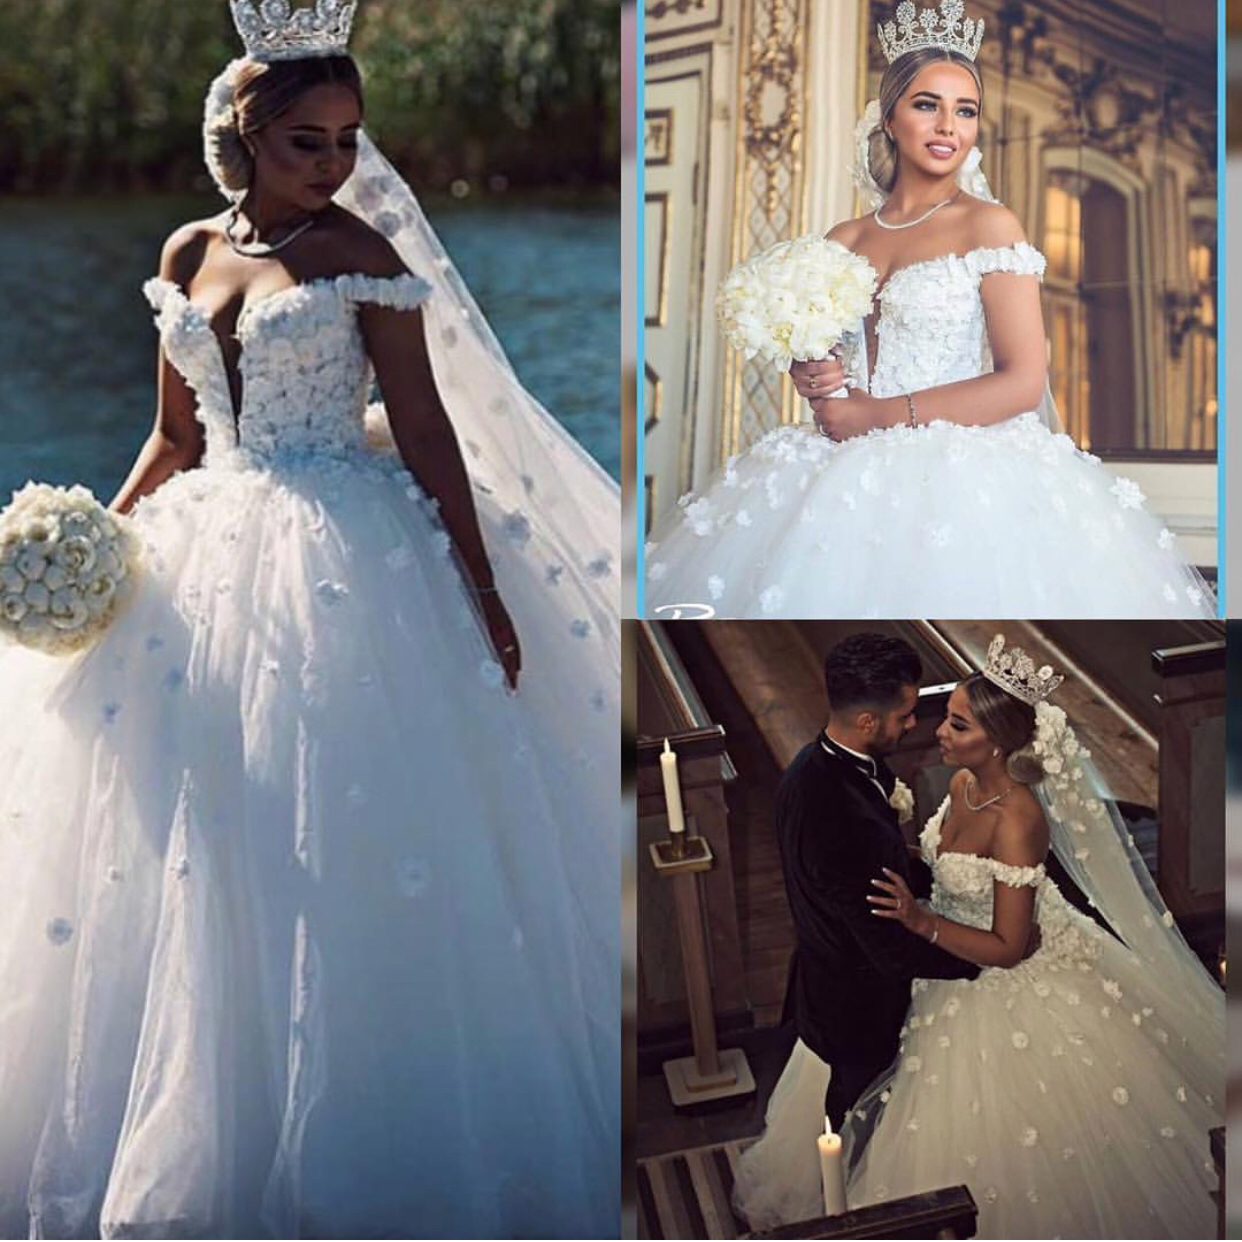 2020 Beautiful Lace Ball Gown Wedding Dresses Off Shoulder Sweep Train Bridal Gowns With Lace Applique Backless Wedding Gowns Long Sleeve Wedding Dresses Pretty Dresses From Cinderelladress 158 7 Dhgate Com